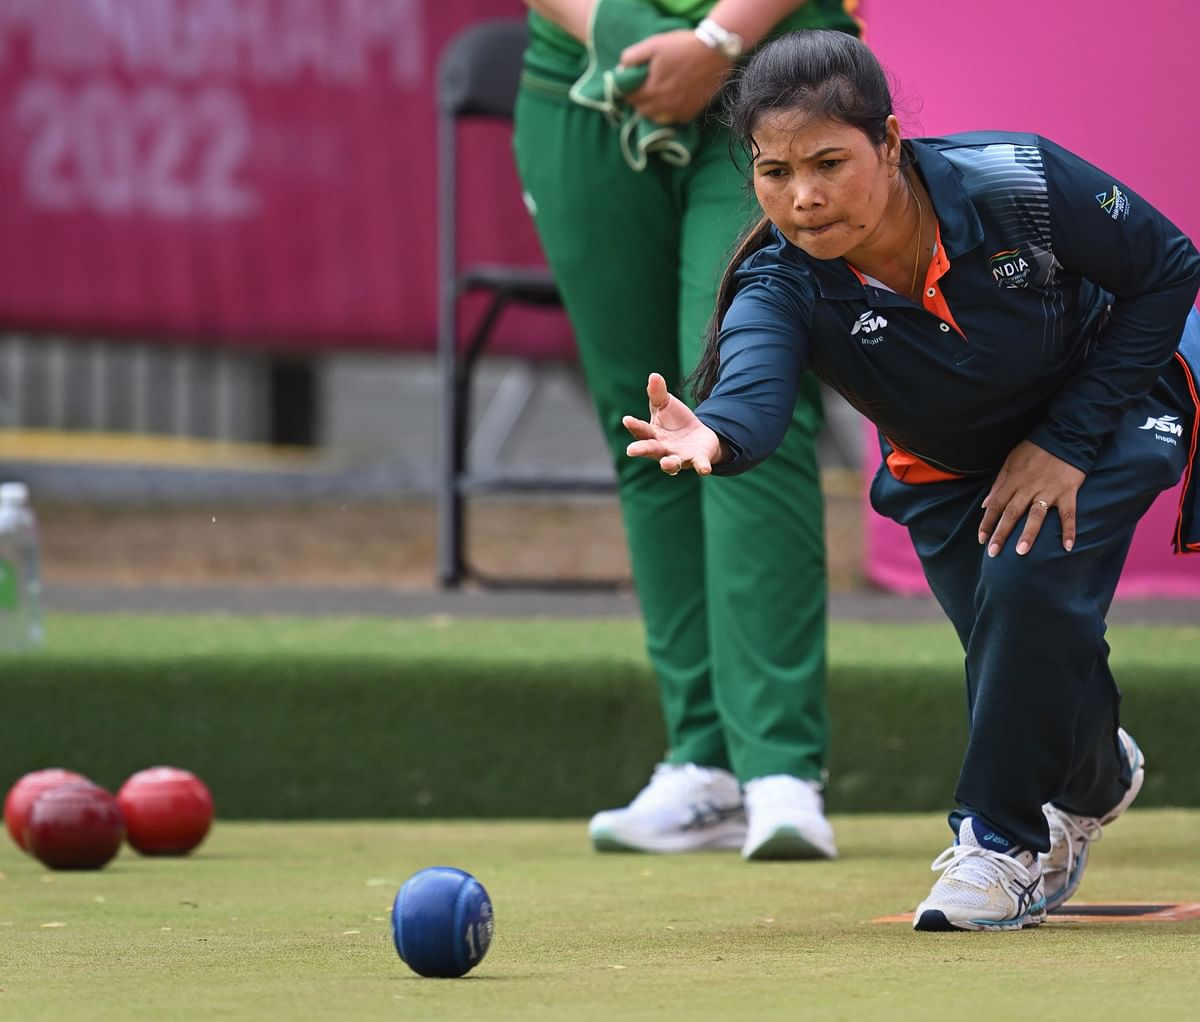 This is India's first-ever medal in lawn bowls at the Commonwealth Games.